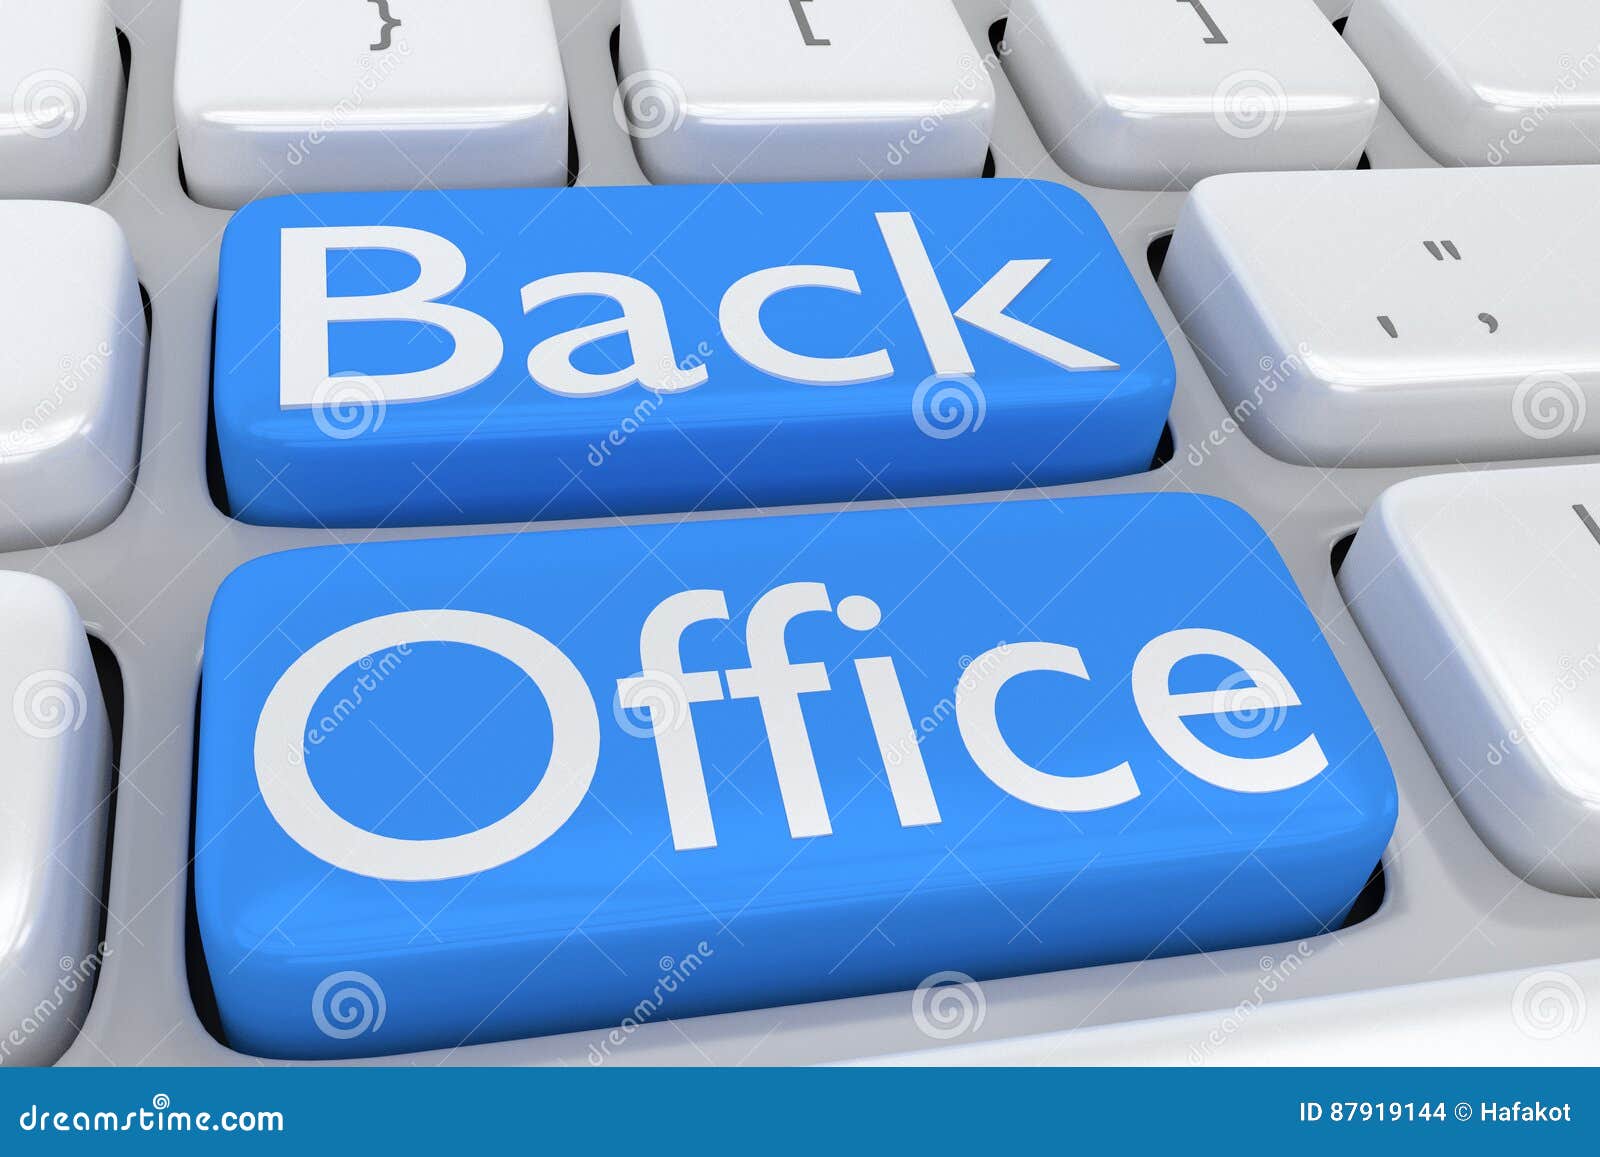 Back Office concept stock illustration. Illustration of dialogue - 87919144